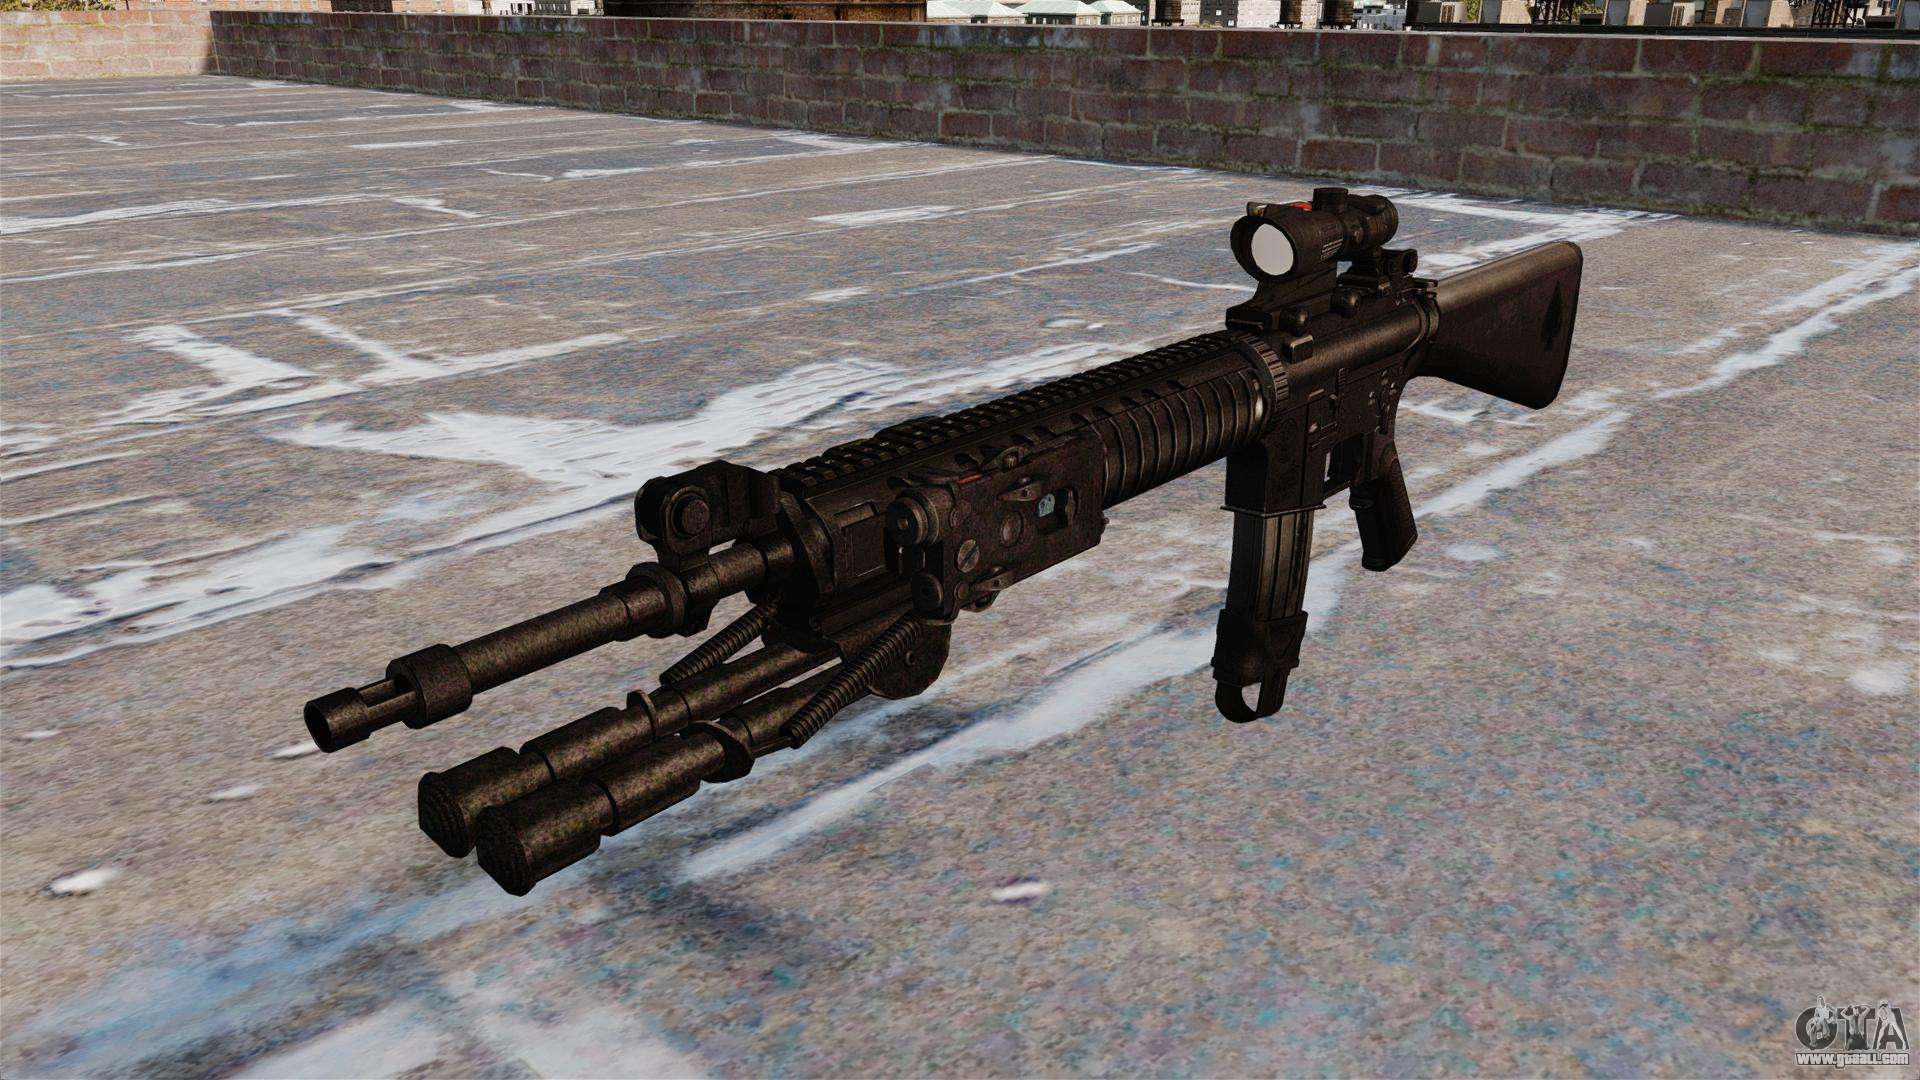 The M16A4 assault rifle for GTA 4